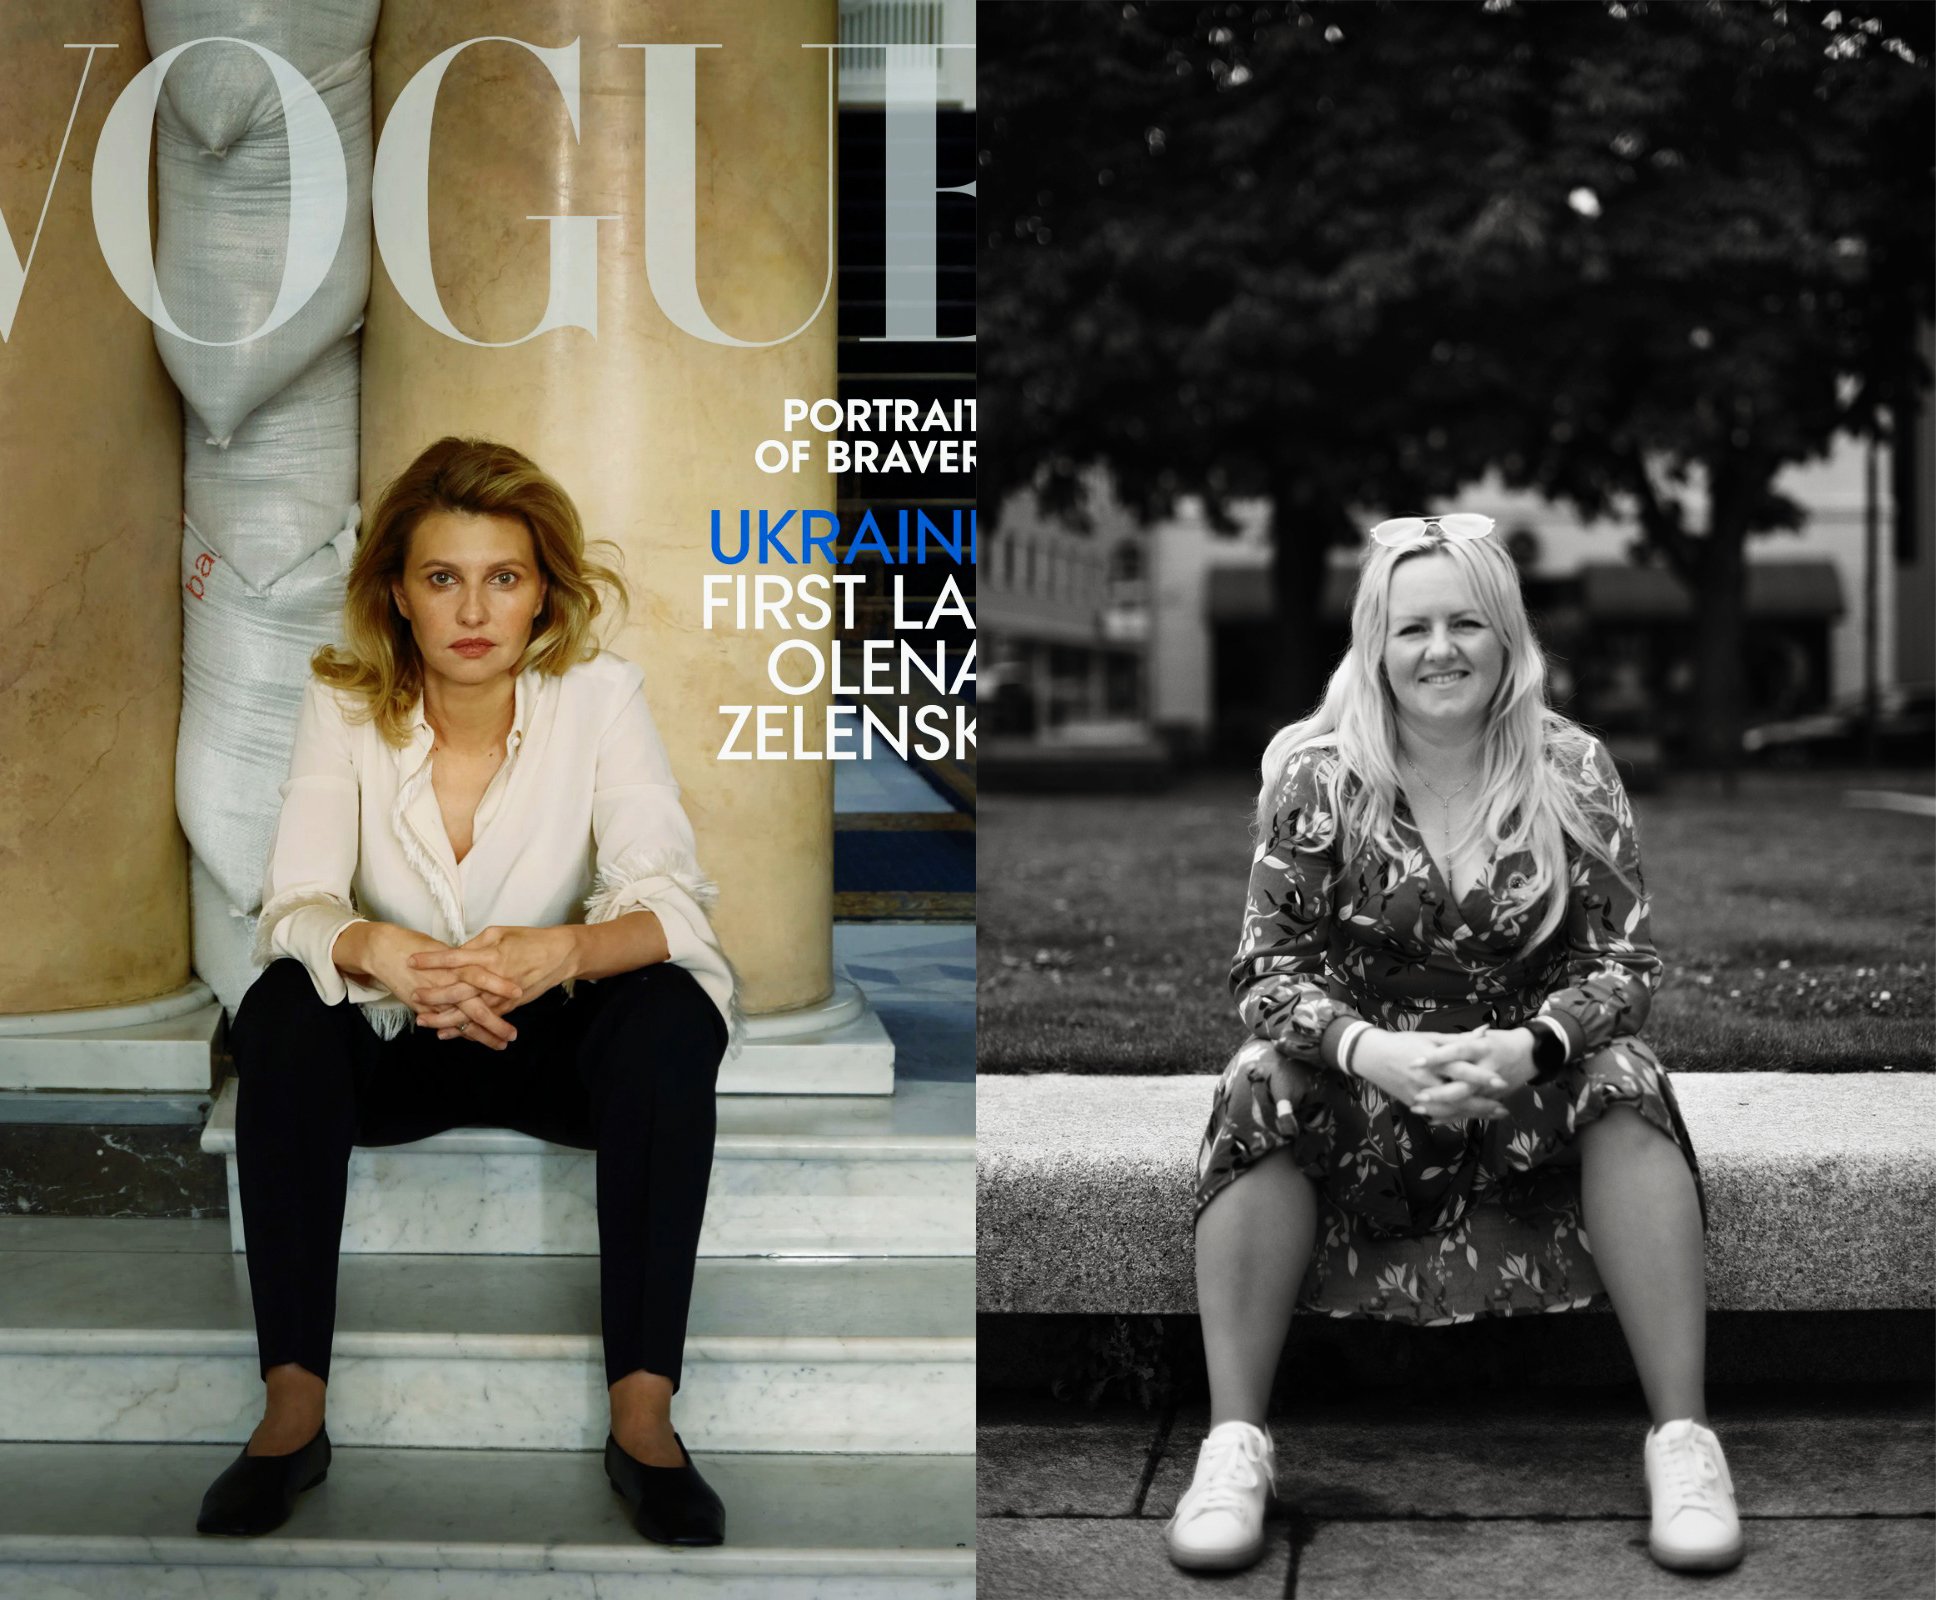  On the left, a US Vogue cover of the First Lady of Ukraine, Olena Zelenska, by the photographer Annie Leibovitz. Ms. Zelenska’s empowered, self-assured pose inspired confidence in other women. In fact, women, as a challenge against female stereotype